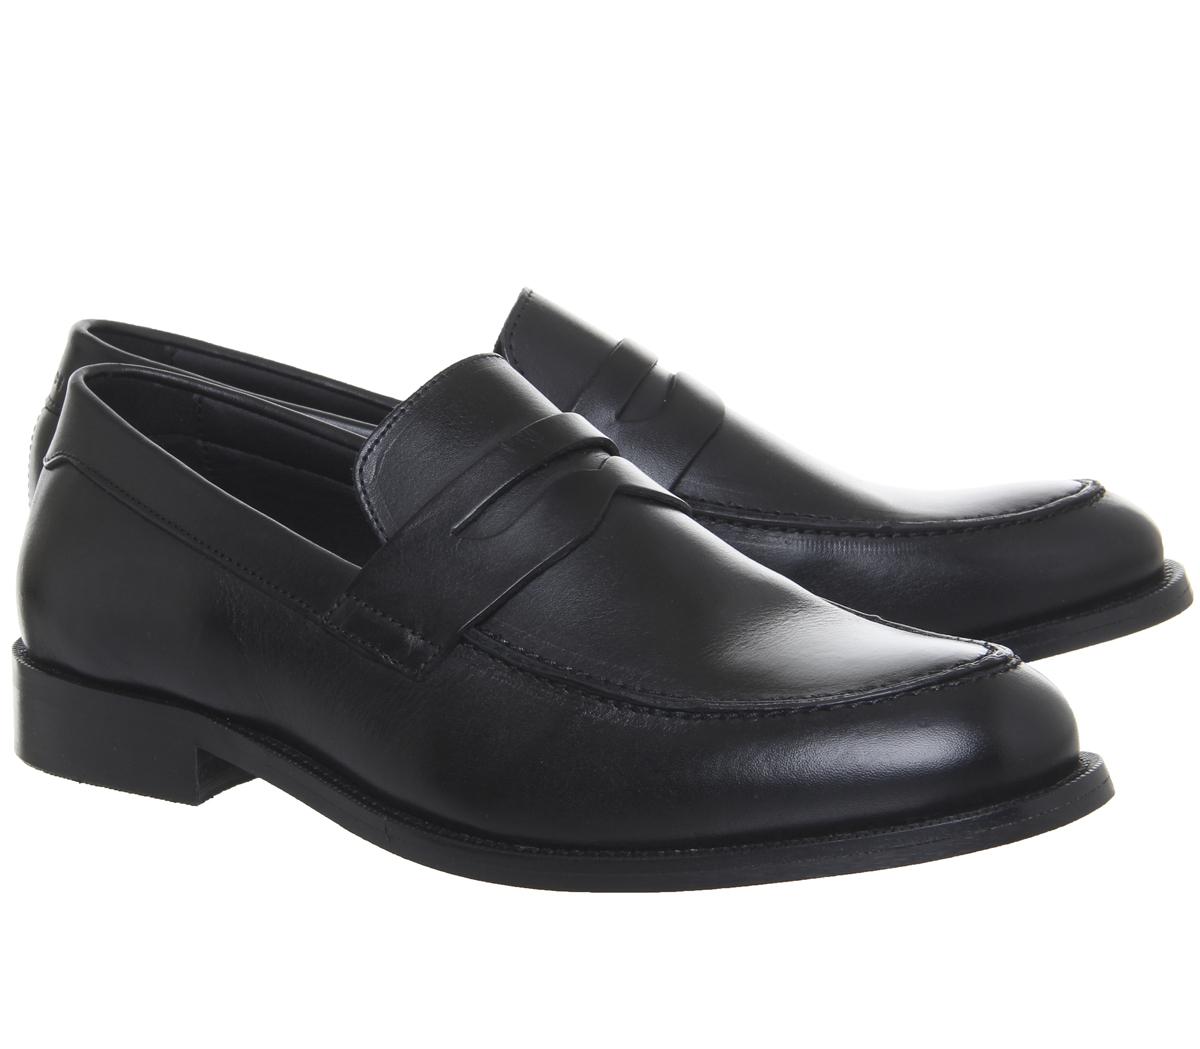 Office Office Classics Loafers Black Leather - Smart